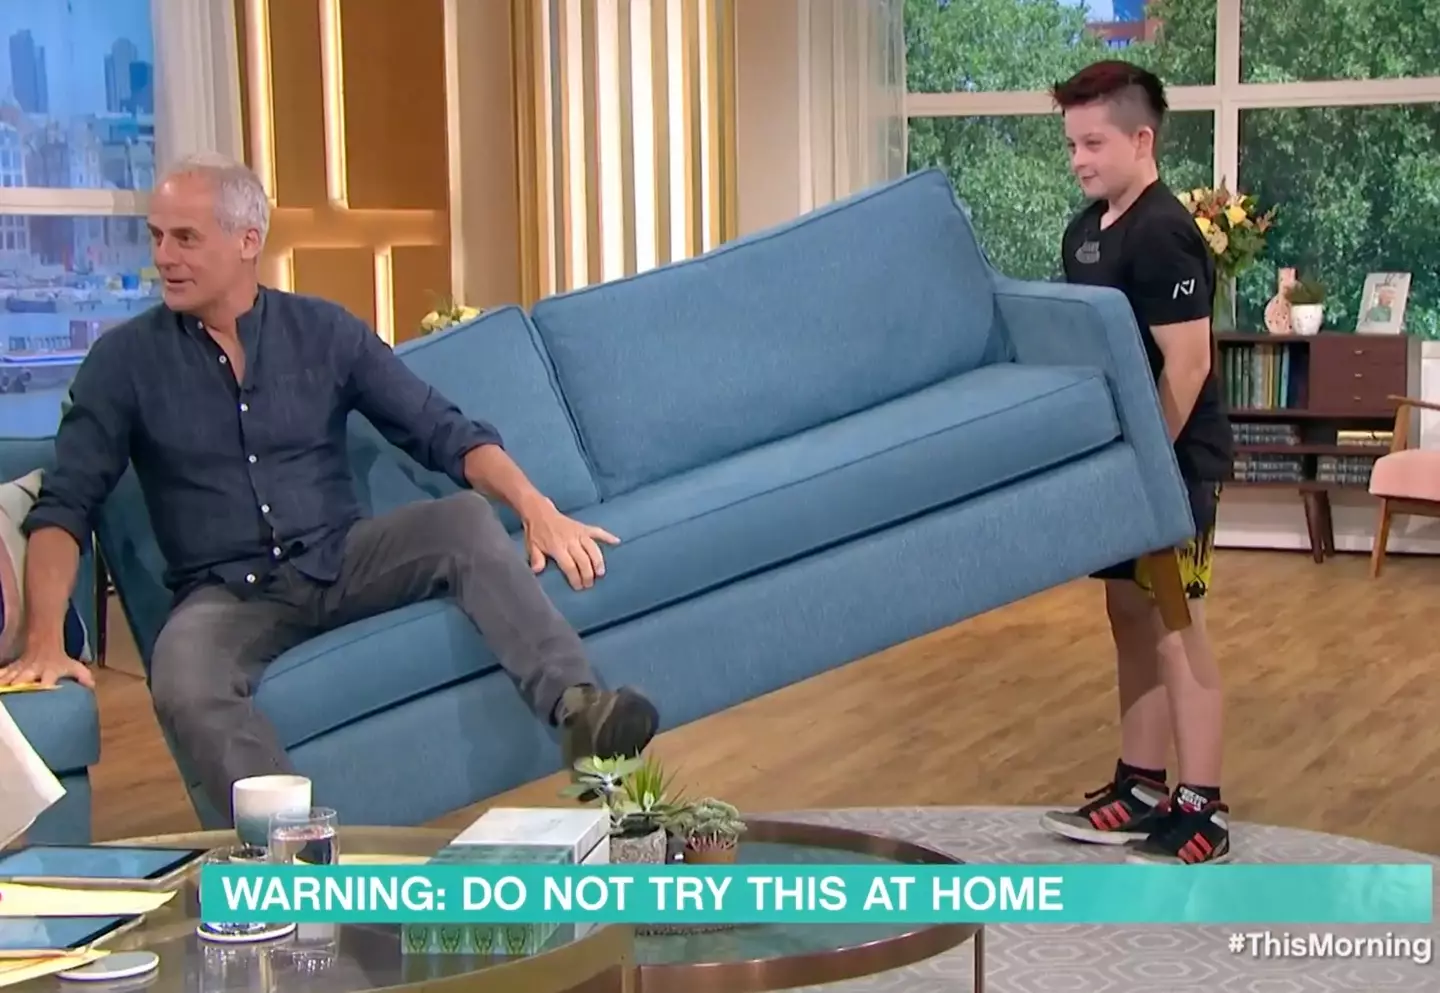 The 10-year-old demonstrated his strength on the This Morning sofa.